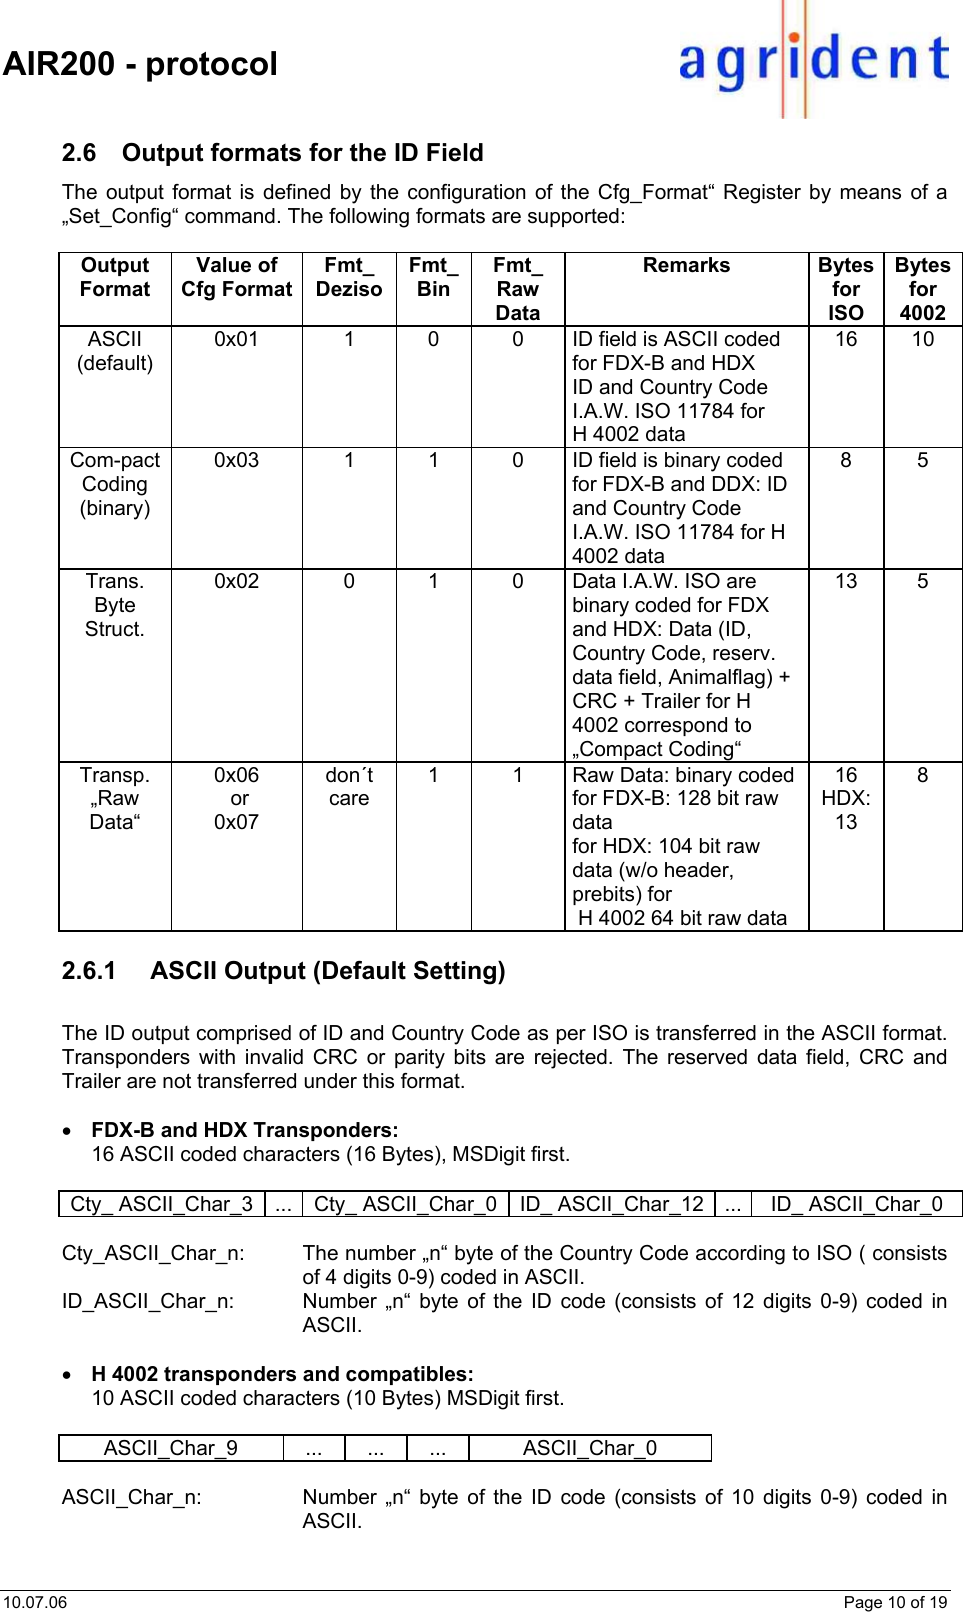    AIR200 - protocol  10.07.06    Page 10 of 19 2.6 Output formats for the ID Field The output format is defined by the configuration of the Cfg_Format“ Register by means of a „Set_Config“ command. The following formats are supported:  Output Format Value of Cfg Format Fmt_ Deziso Fmt_Bin Fmt_ Raw Data Remarks Bytes for ISO Bytes for 4002 ASCII (default) 0x01  1  0  0  ID field is ASCII coded for FDX-B and HDX ID and Country Code I.A.W. ISO 11784 for  H 4002 data 16 10 Com-pact Coding (binary) 0x03  1  1  0  ID field is binary coded for FDX-B and DDX: ID and Country Code I.A.W. ISO 11784 for H 4002 data 8 5 Trans. Byte Struct. 0x02  0  1  0  Data I.A.W. ISO are binary coded for FDX and HDX: Data (ID, Country Code, reserv. data field, Animalflag) + CRC + Trailer for H 4002 correspond to „Compact Coding“ 13 5 Transp. „Raw Data“ 0x06  or  0x07 don´t care 1  1  Raw Data: binary coded for FDX-B: 128 bit raw data for HDX: 104 bit raw data (w/o header, prebits) for  H 4002 64 bit raw data 16 HDX: 13 8  2.6.1  ASCII Output (Default Setting)  The ID output comprised of ID and Country Code as per ISO is transferred in the ASCII format. Transponders with invalid CRC or parity bits are rejected. The reserved data field, CRC and Trailer are not transferred under this format.  • FDX-B and HDX Transponders:    16 ASCII coded characters (16 Bytes), MSDigit first.  Cty_ ASCII_Char_3  ...  Cty_ ASCII_Char_0 ID_ ASCII_Char_12 ... ID_ ASCII_Char_0  Cty_ASCII_Char_n:  The number „n“ byte of the Country Code according to ISO ( consists of 4 digits 0-9) coded in ASCII.  ID_ASCII_Char_n:  Number „n“ byte of the ID code (consists of 12 digits 0-9) coded in ASCII.  • H 4002 transponders and compatibles:   10 ASCII coded characters (10 Bytes) MSDigit first.  ASCII_Char_9 ... ... ... ASCII_Char_0  ASCII_Char_n:  Number „n“ byte of the ID code (consists of 10 digits 0-9) coded in ASCII.  